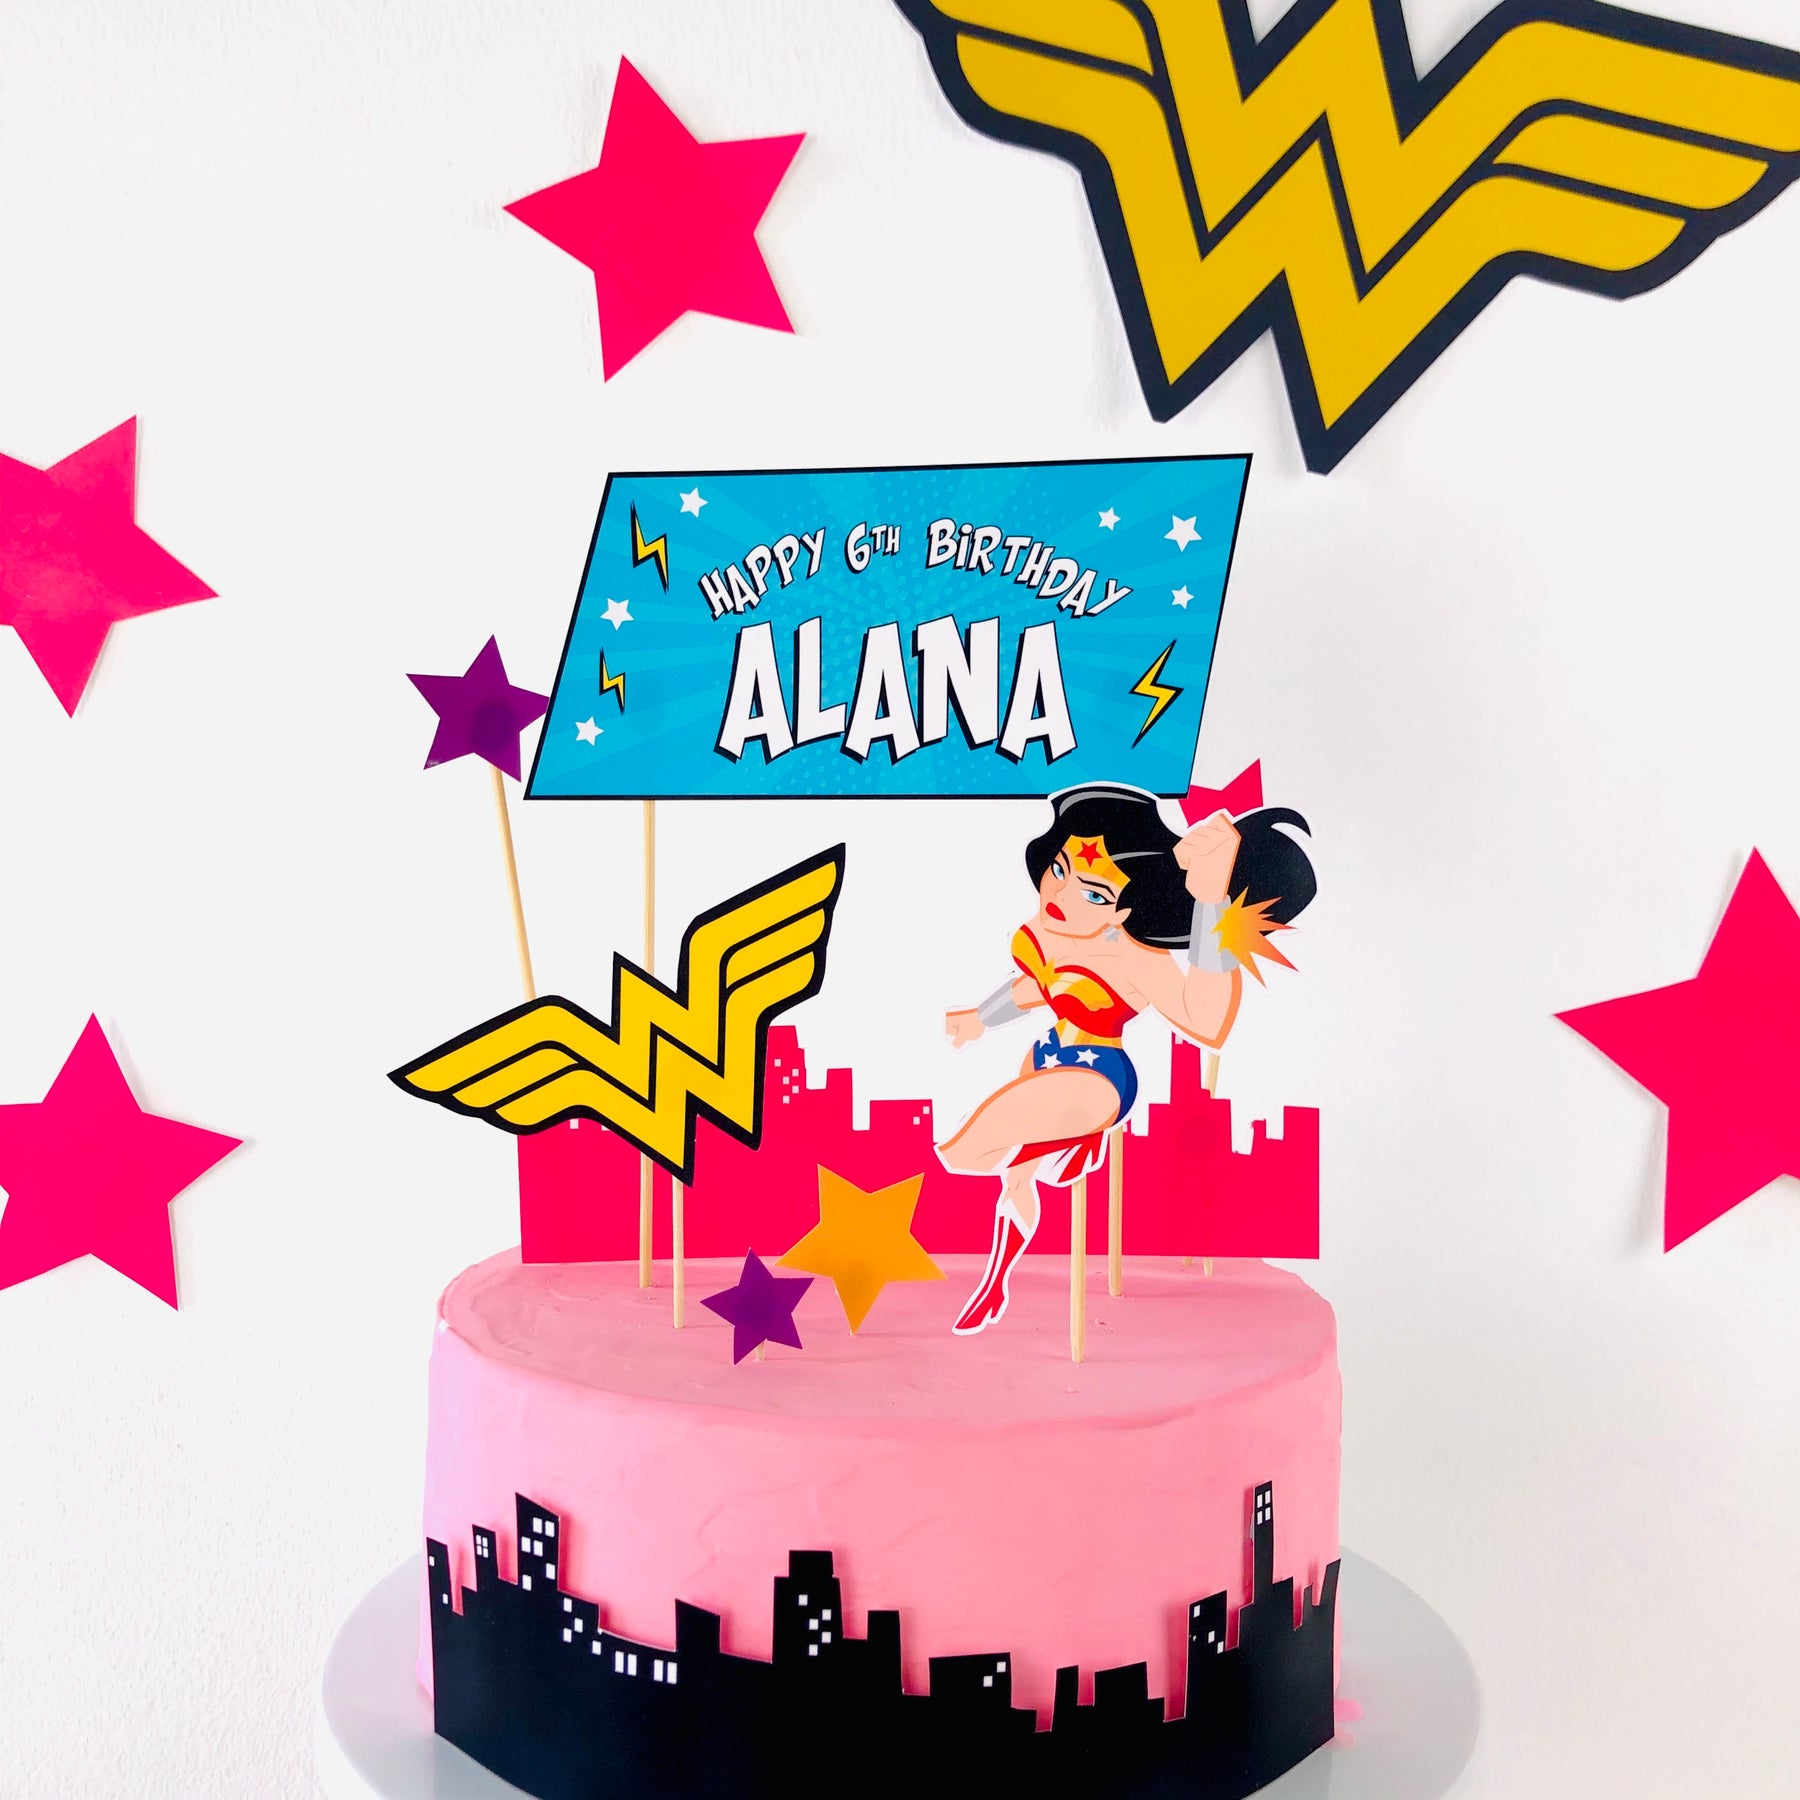 Wonder Woman cake - Picture of Larry's House of Cakes, Carbondale -  Tripadvisor